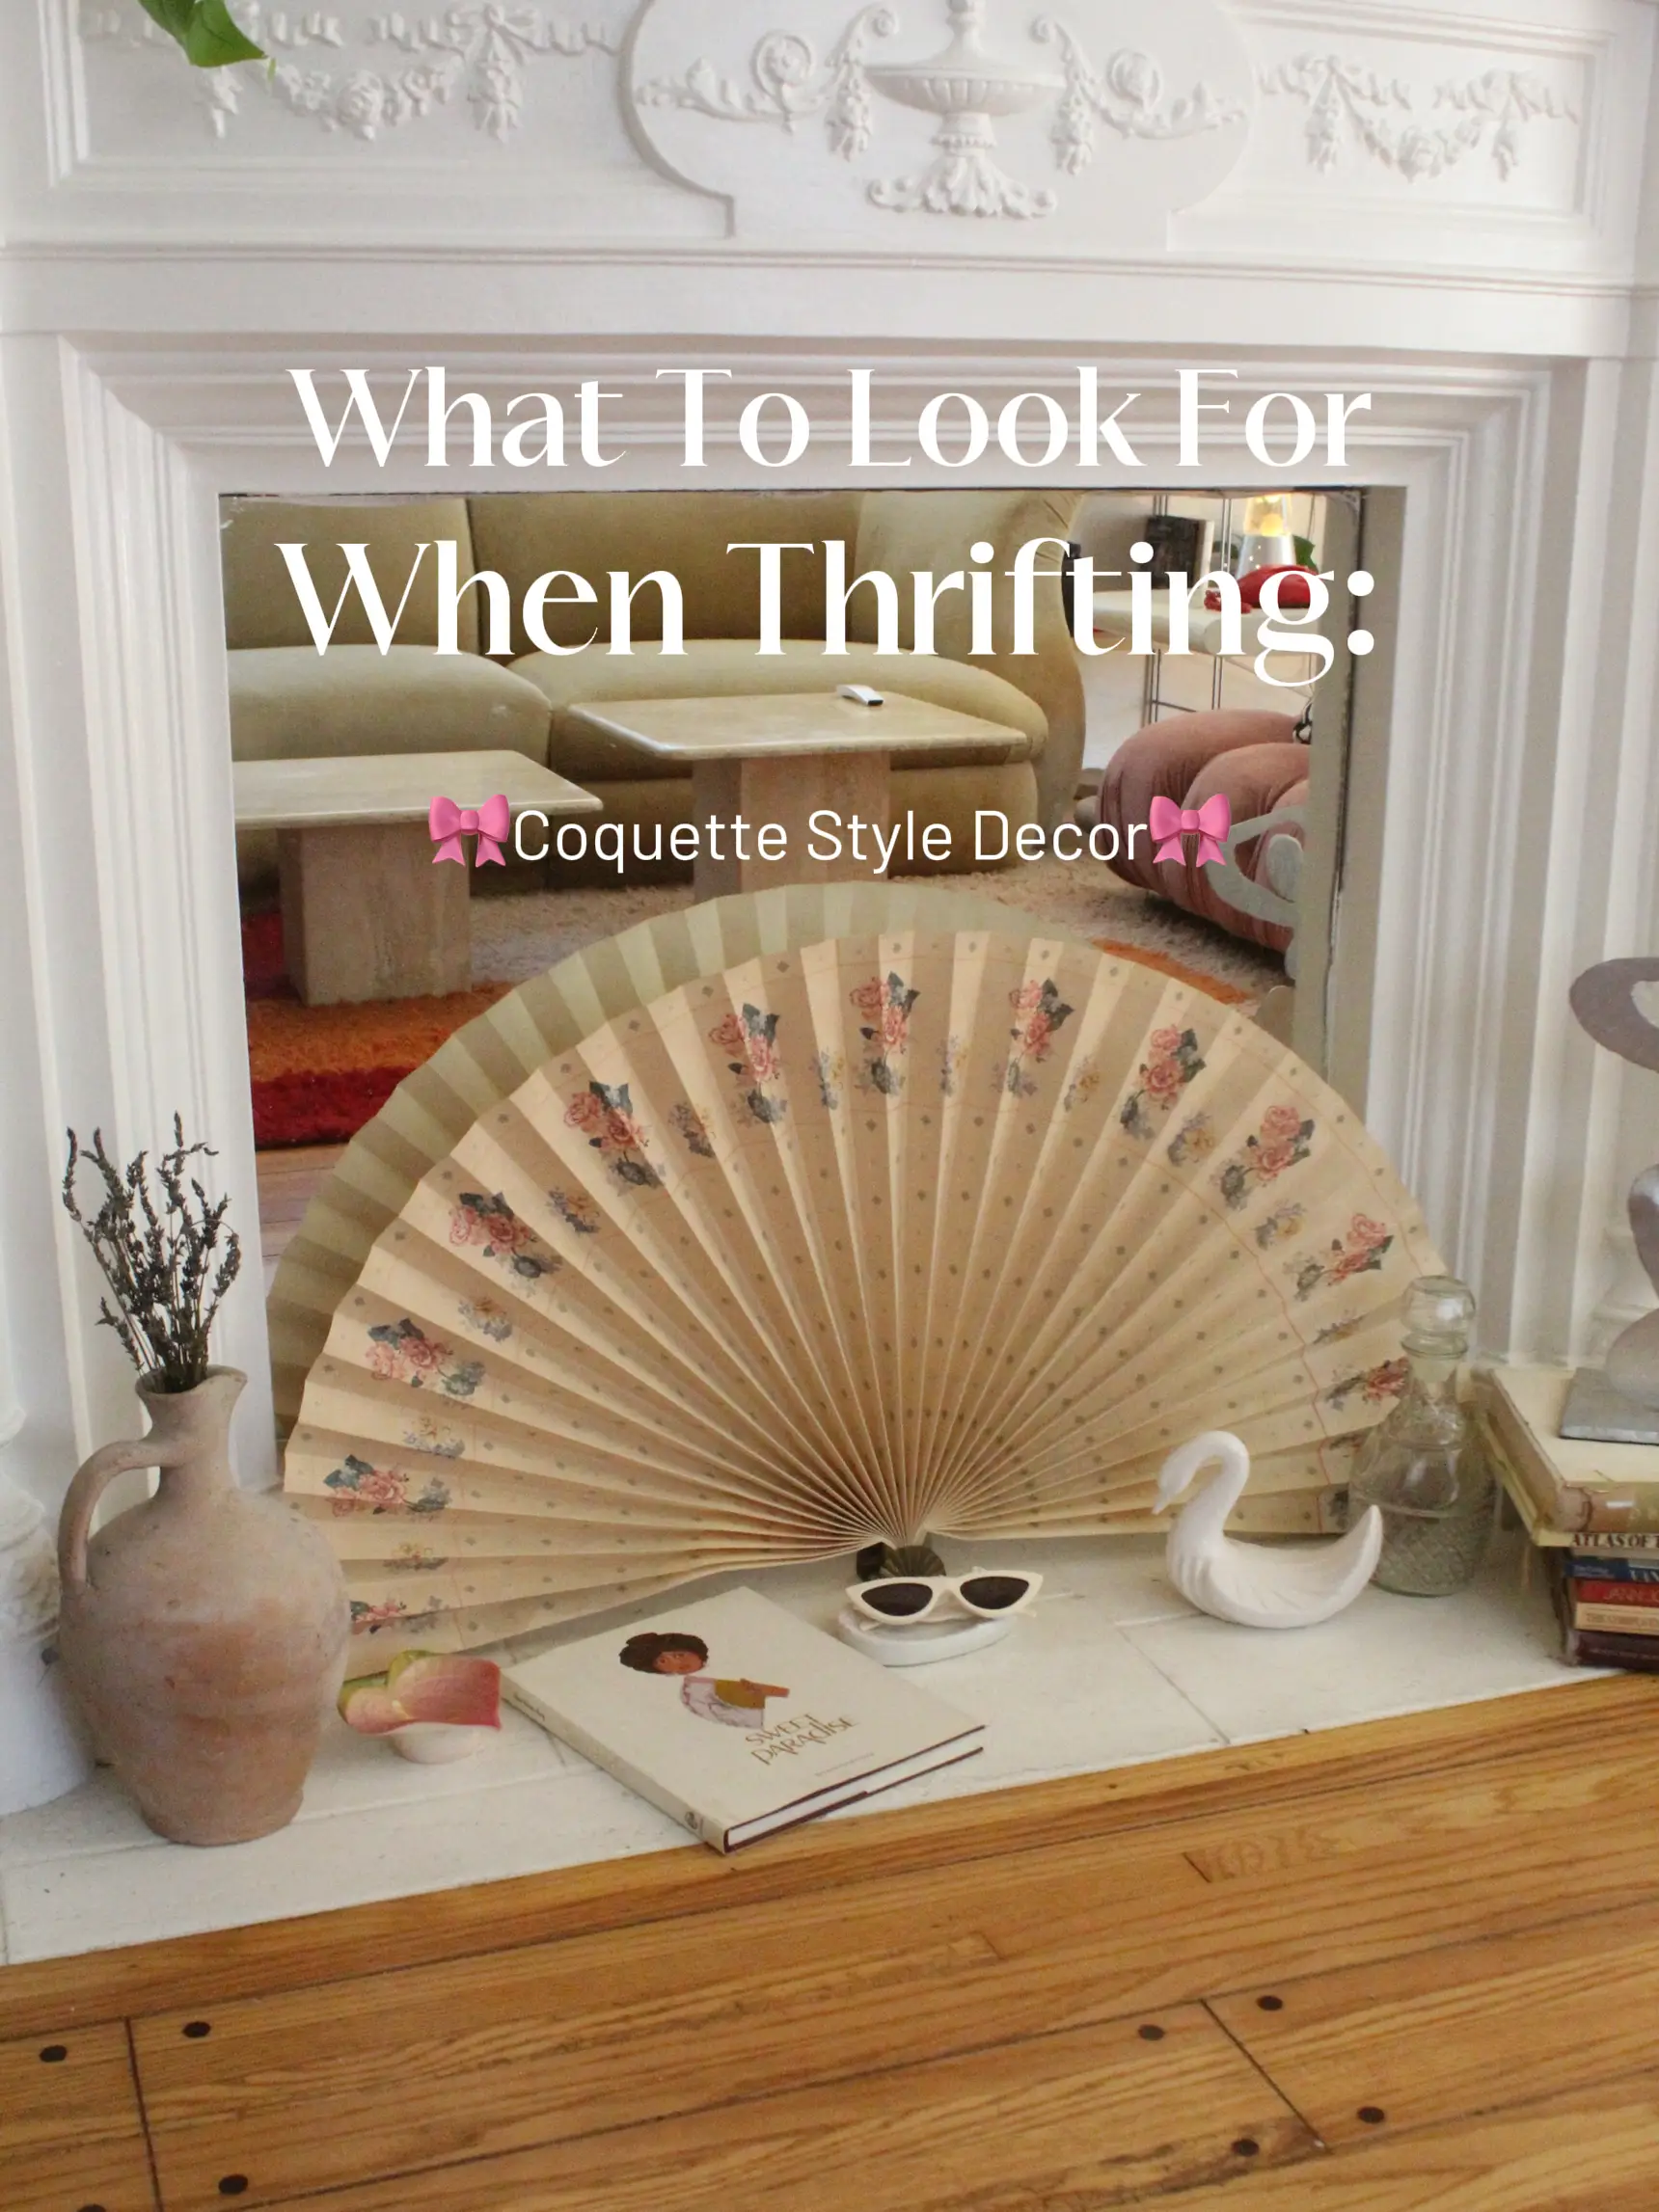 How to Thrift: Coquette Style Decor 🎀, Gallery posted by Camille